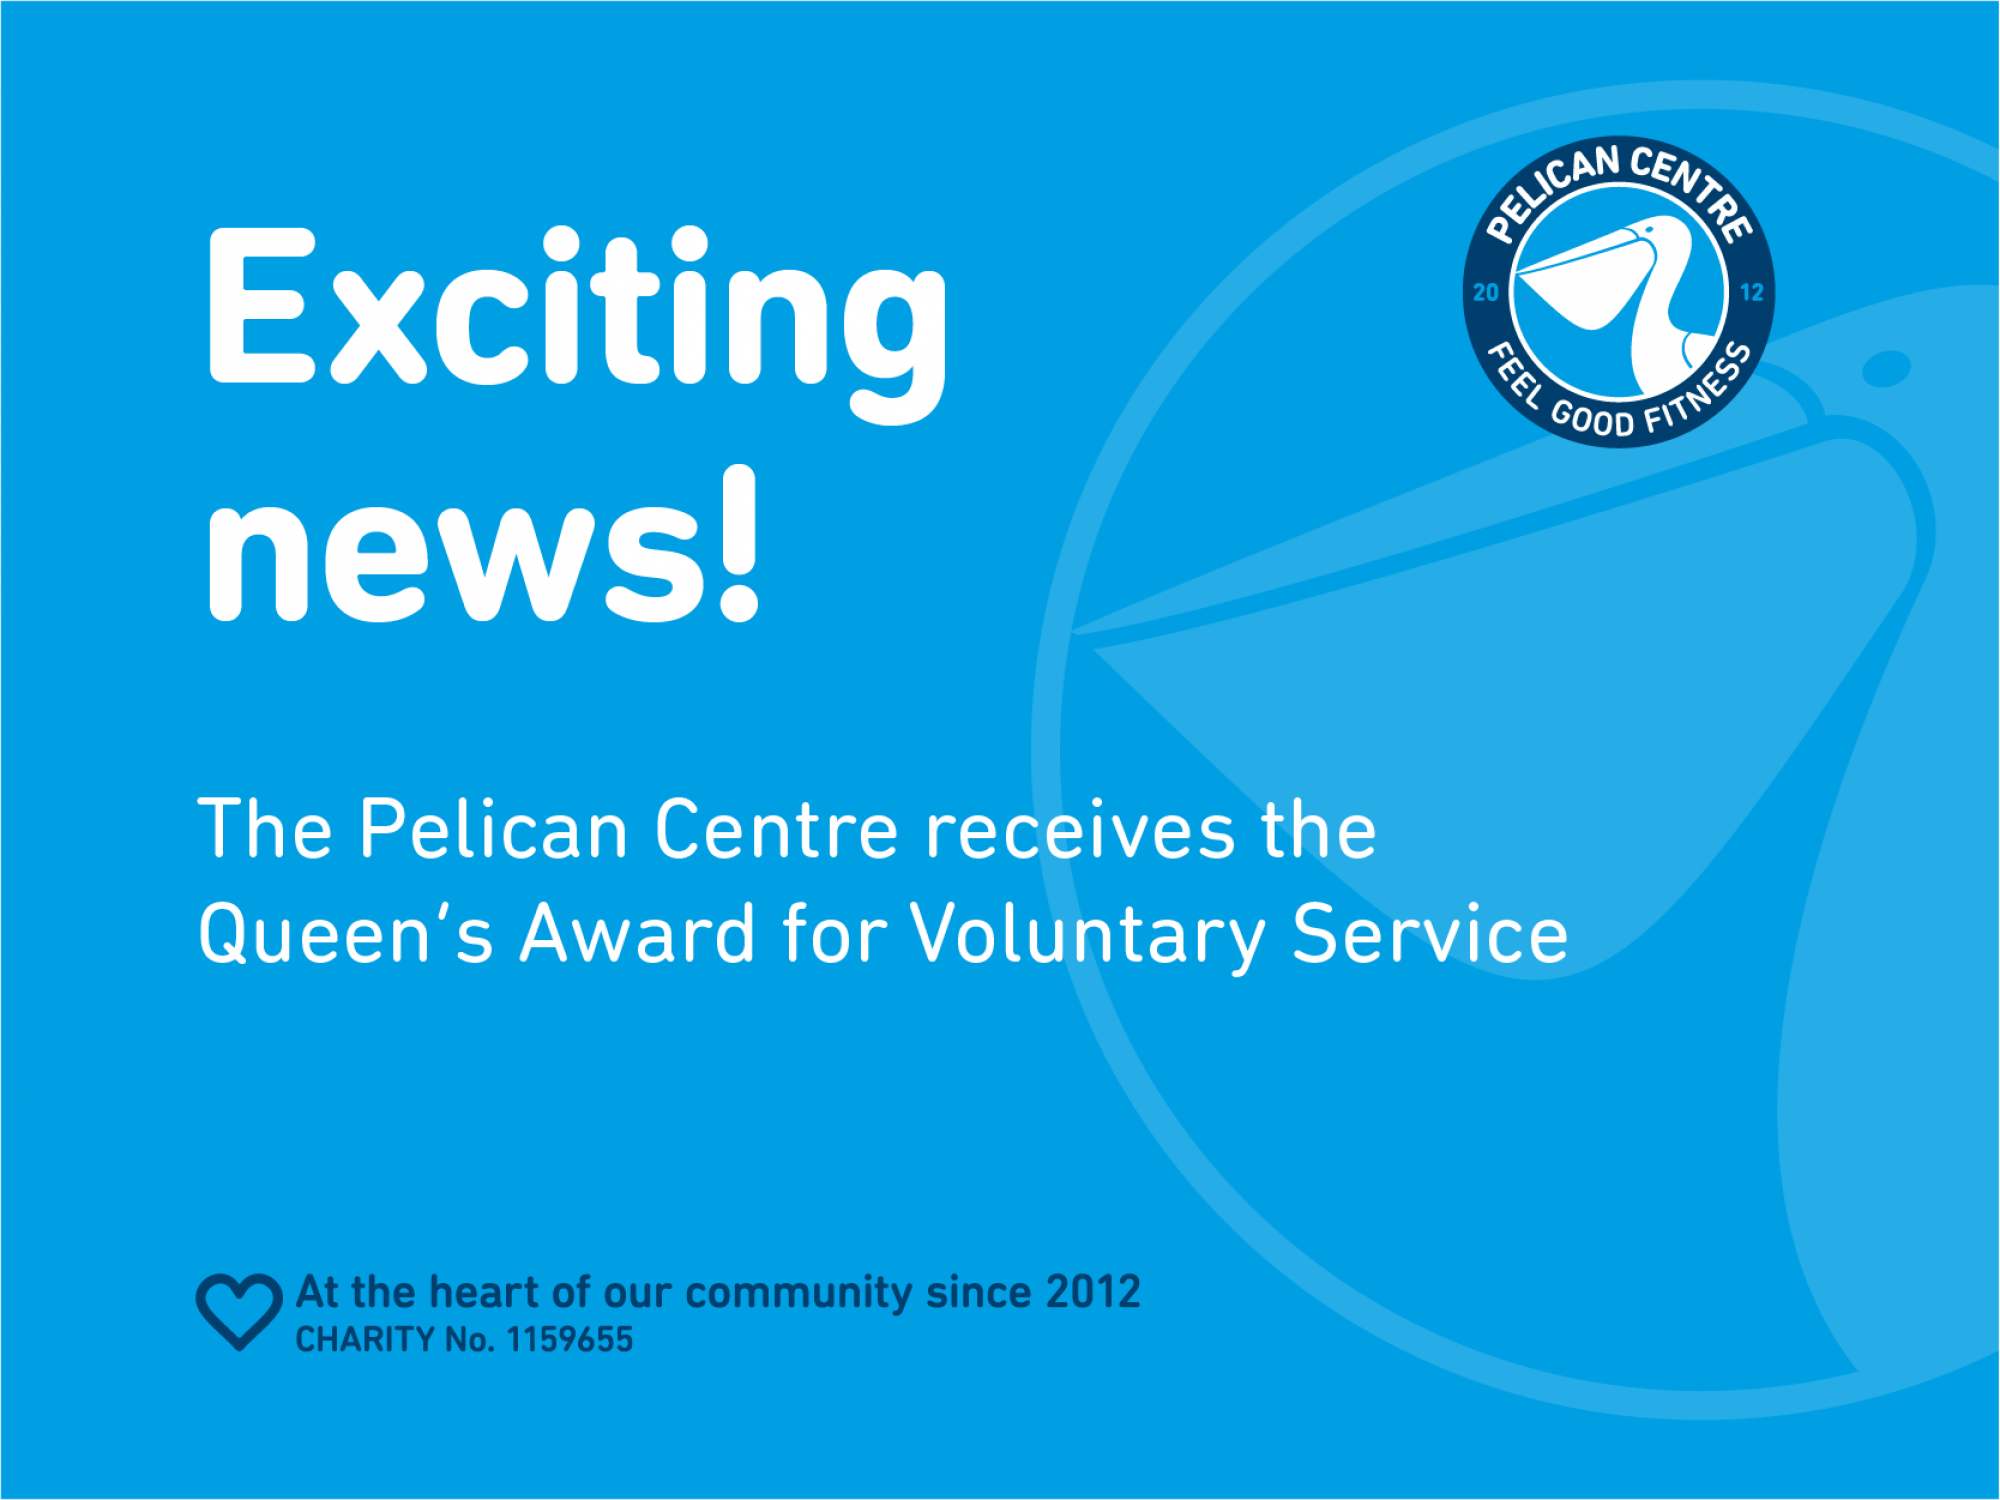   The Pelican Centre - Feel Good Fitness  Pelican Centre receives Queen's Award for Voluntary Service in Platinum Jubilee Year